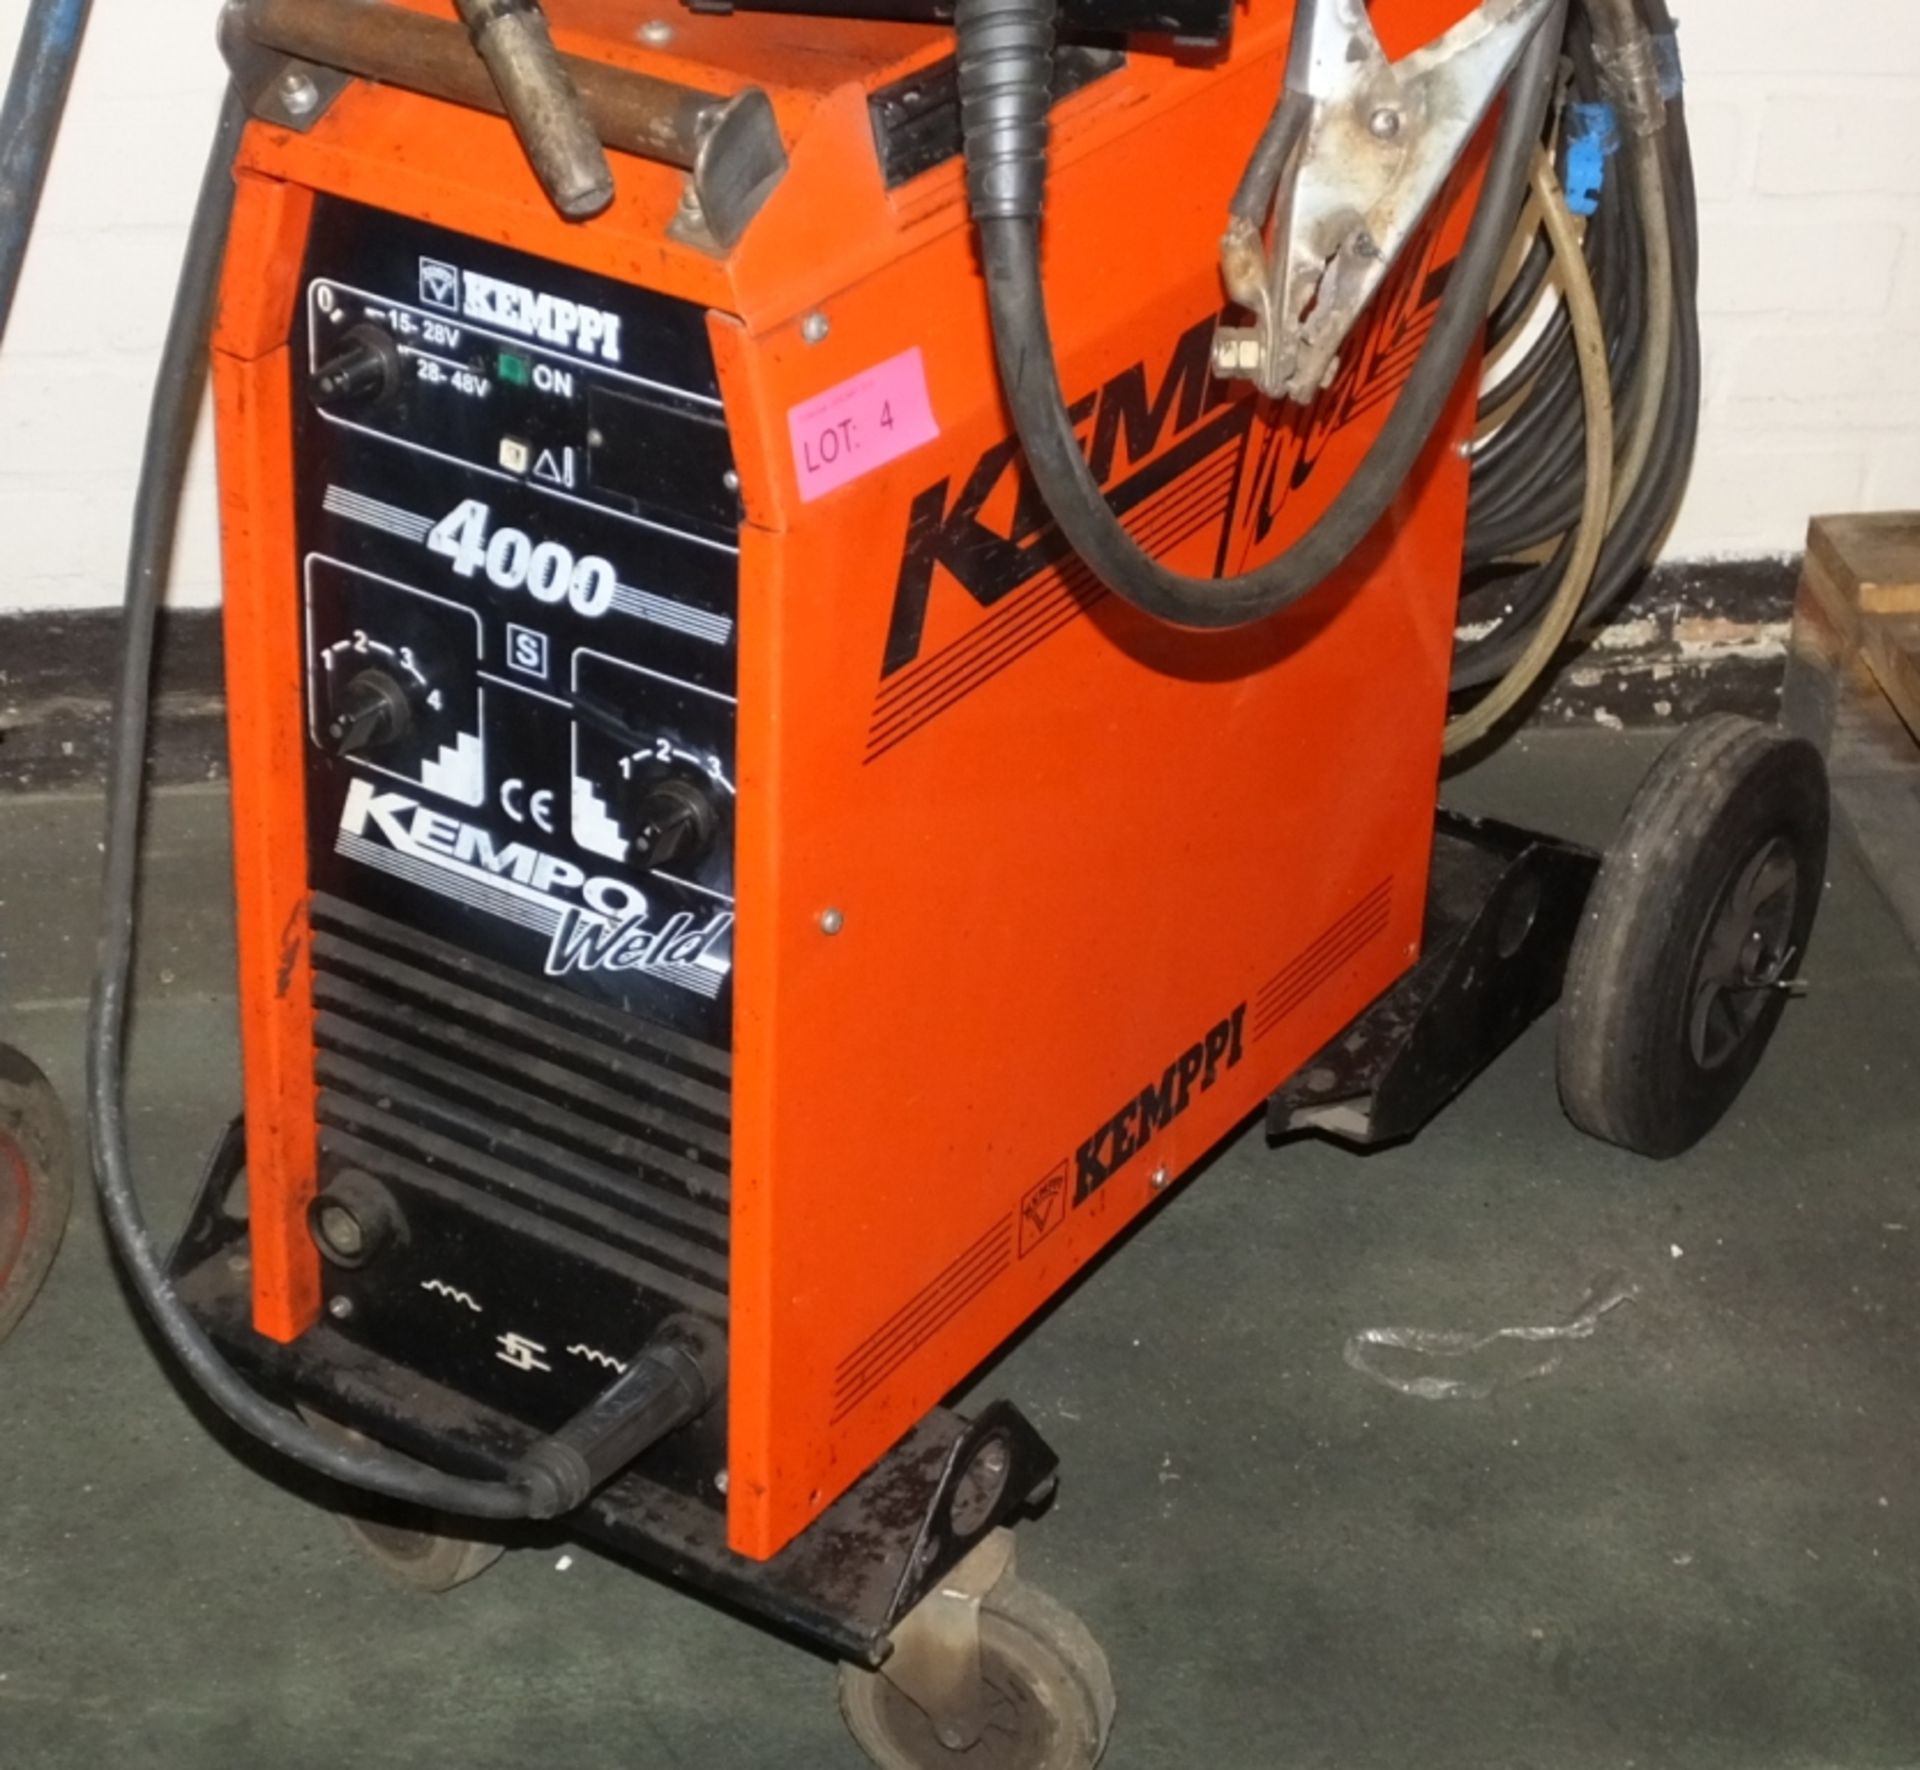 Kemppi Kempo welder 4000 with Kempo Weld 400 head unit - Image 2 of 4